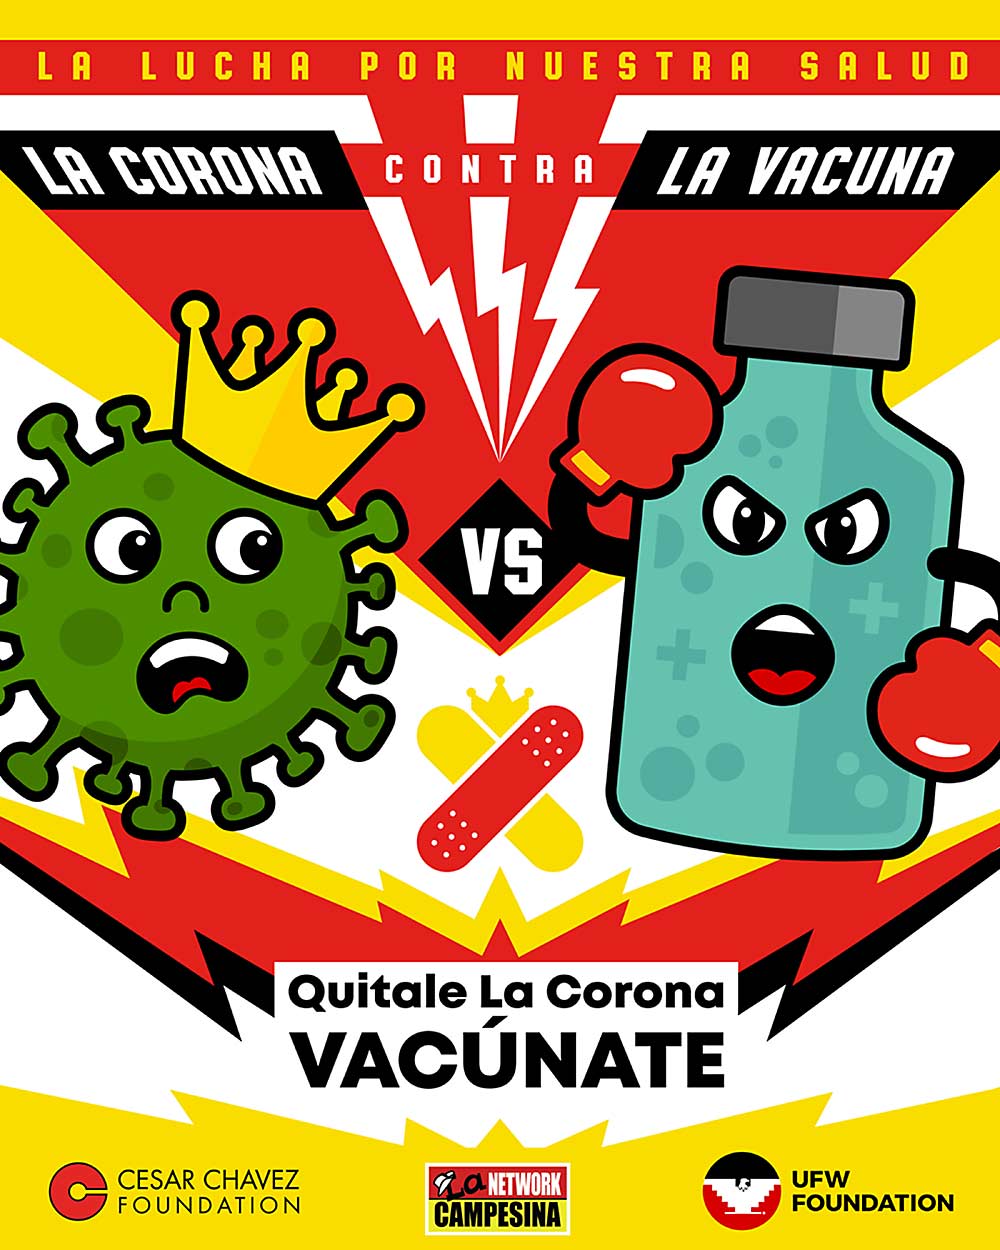 The UFW Foundation, the charitable arm of the California-based United Farm Workers advocacy organization, has launched an educational campaign to discuss the vaccine and other methods to contend with the coronavirus among farmworkers. (Courtesy UFW Foundation)